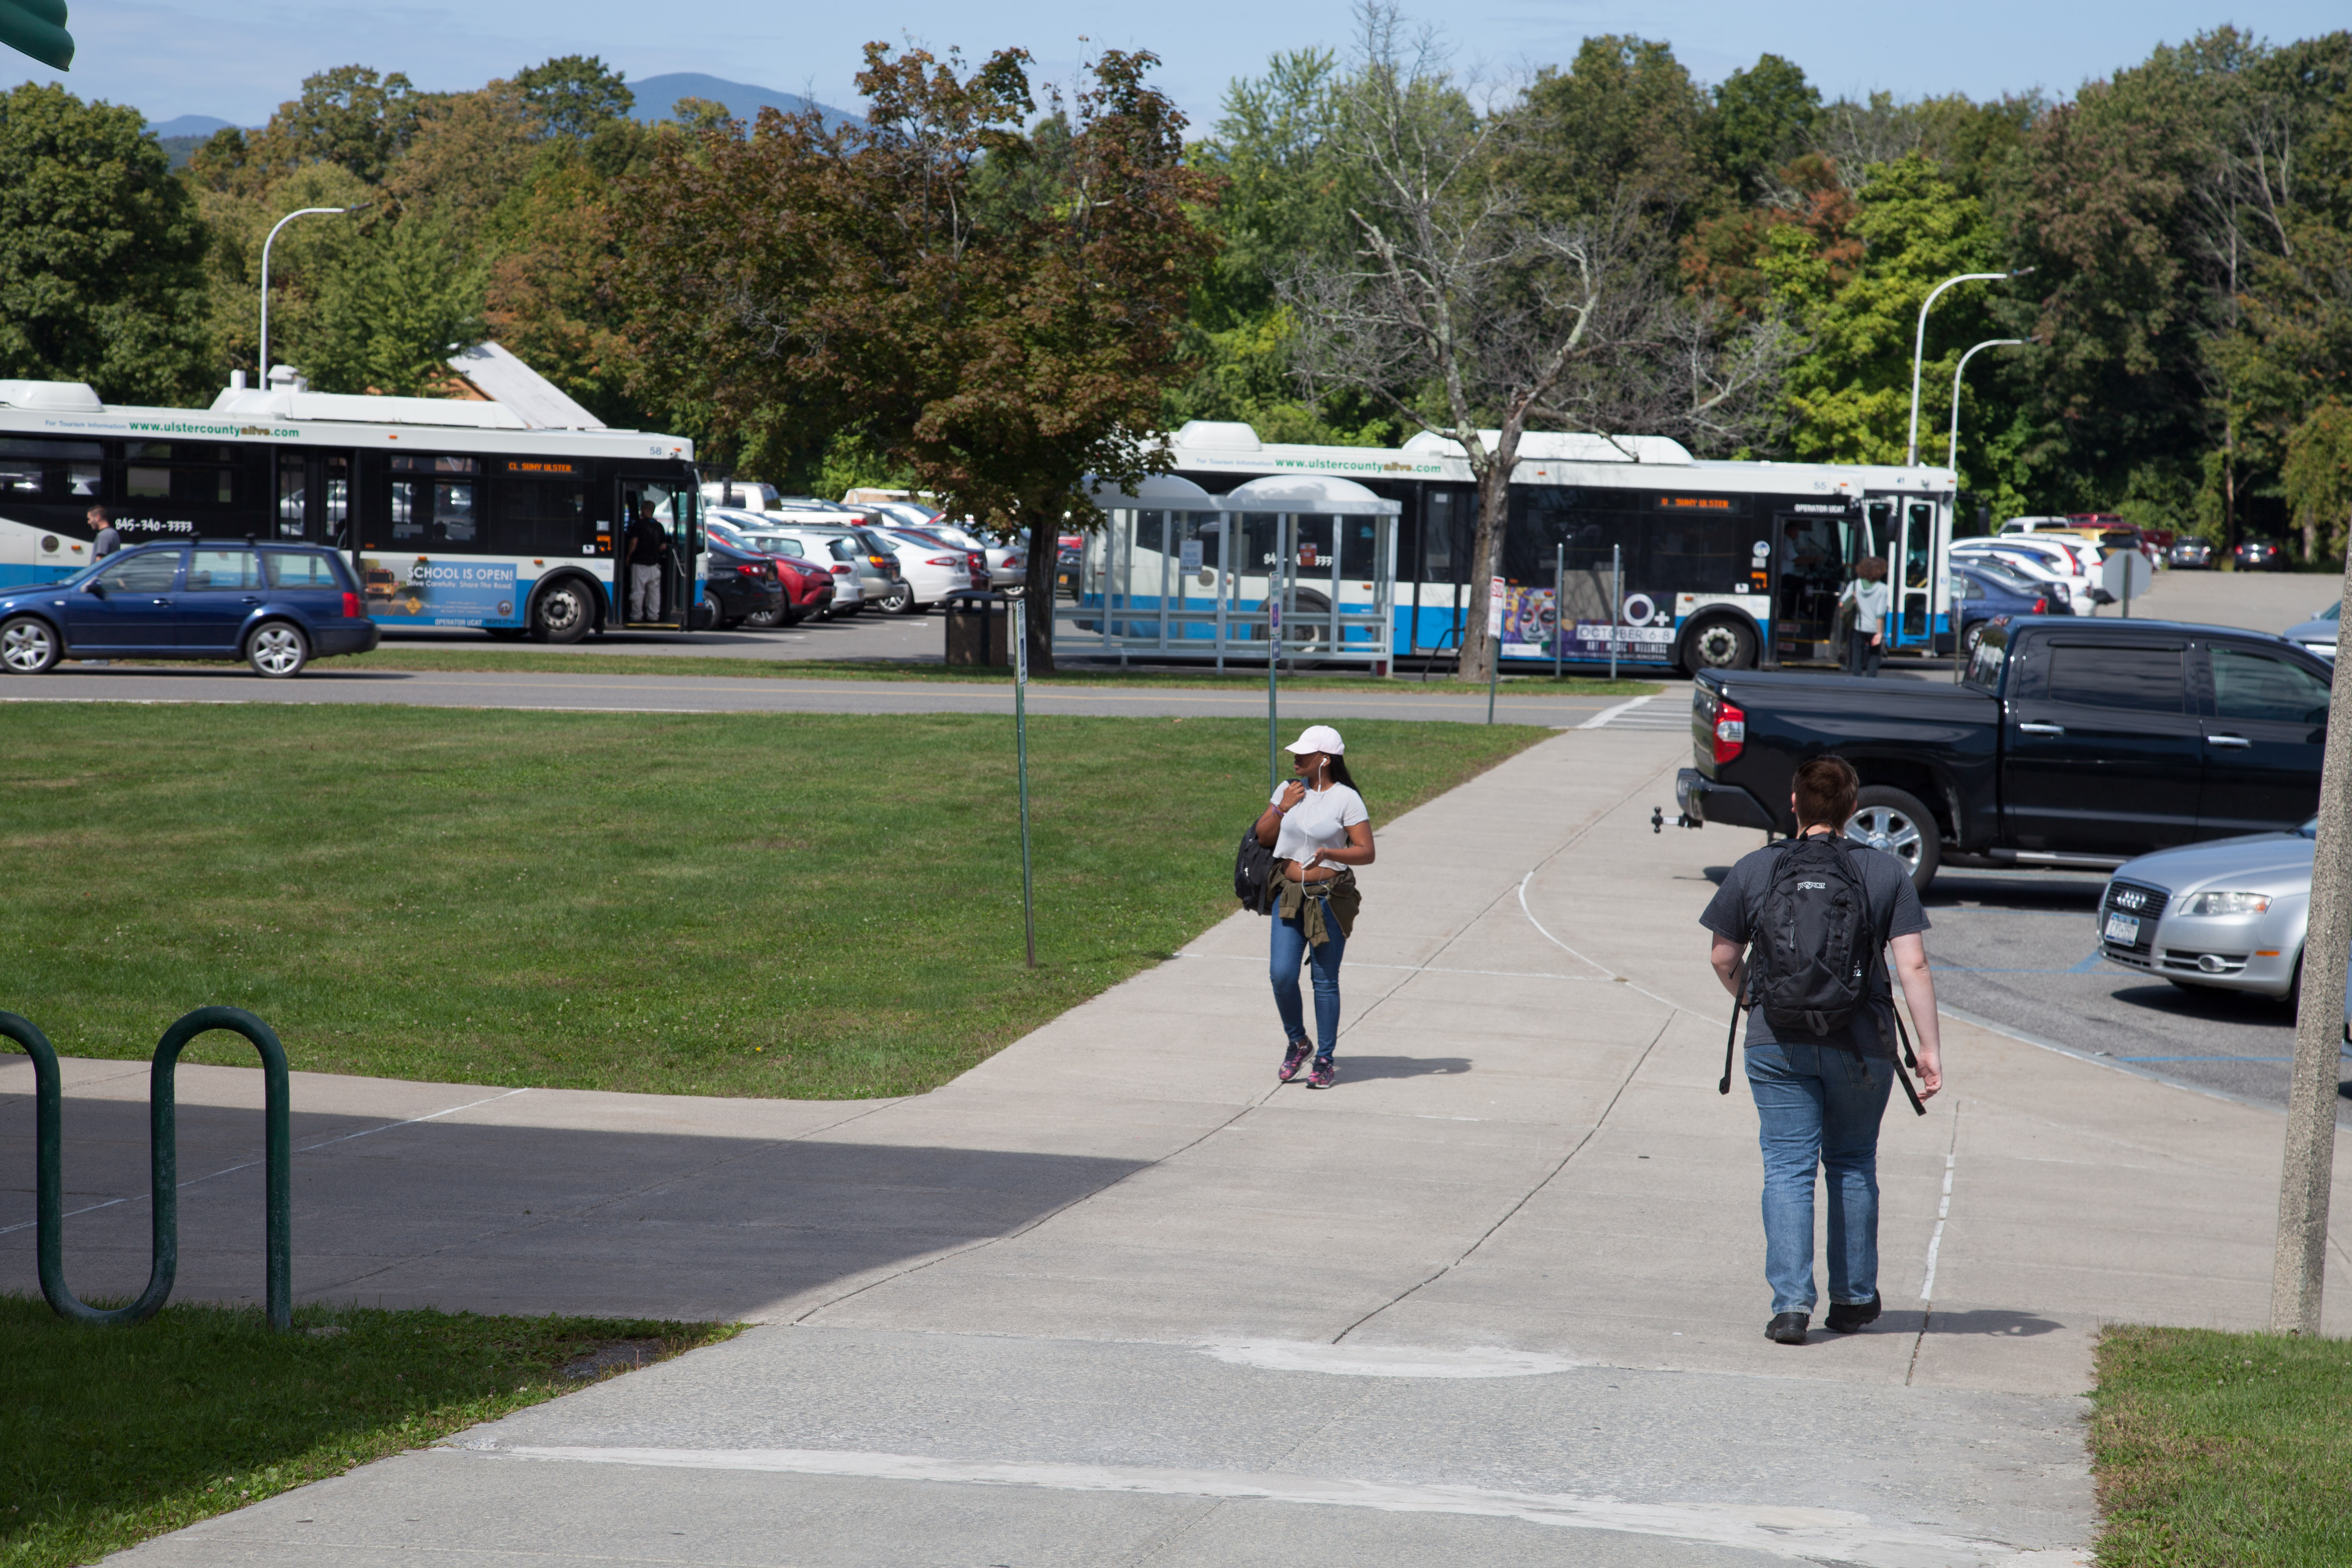 campus view with students and busses